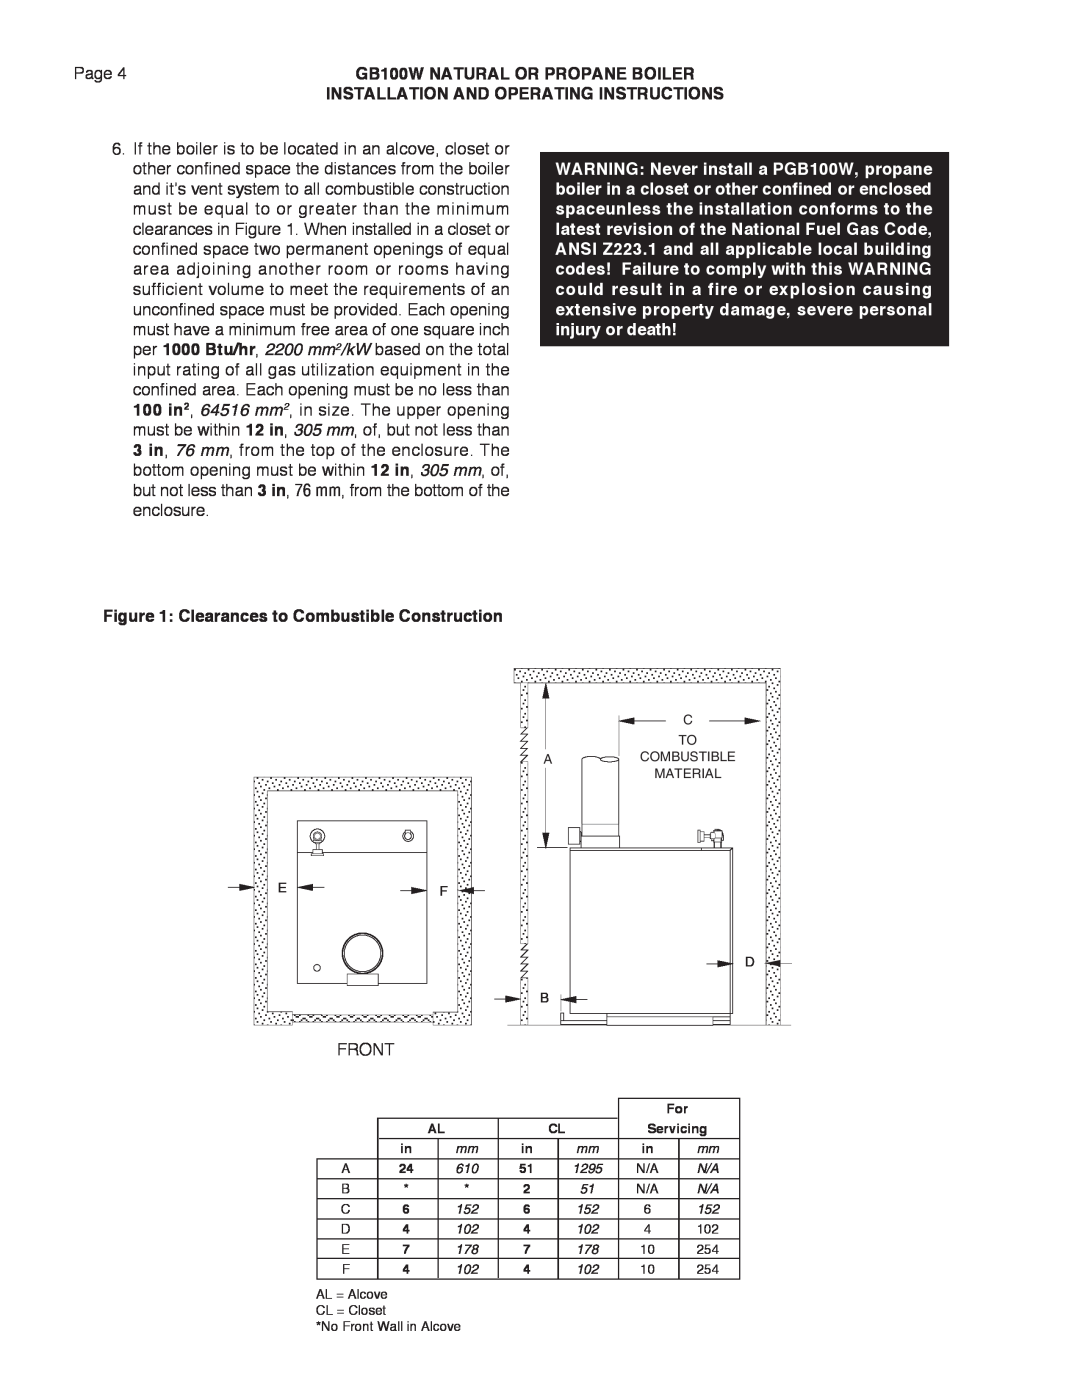 Smith Cast Iron Boilers manual Page, Clearances to Combustible Construction, Front, GB100W NATURAL OR PROPANE BOILER 